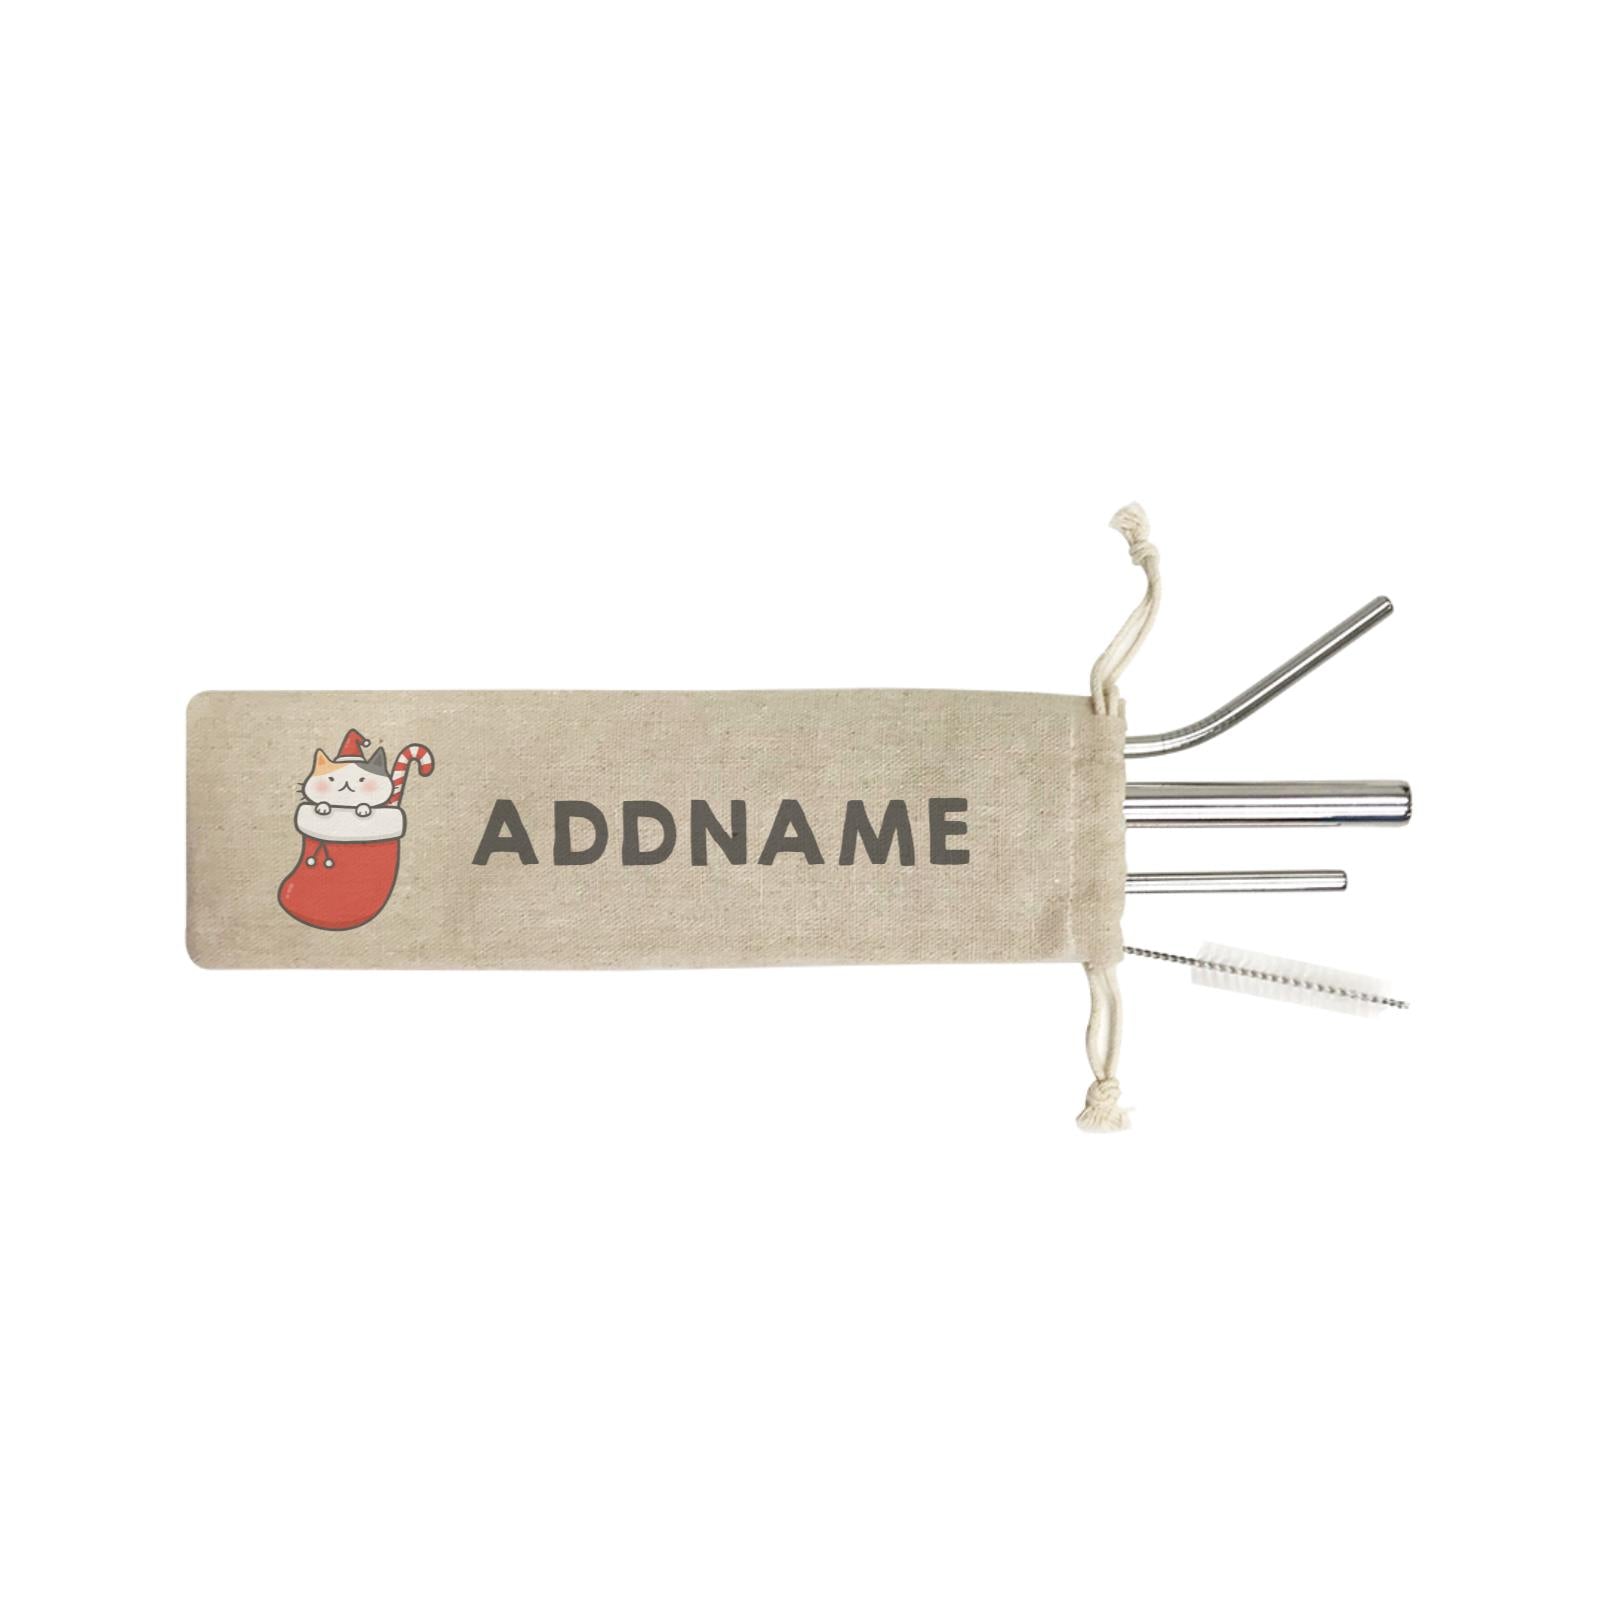 Xmas Cute Cat In Christmas Sock Addname SB 4-in-1 Stainless Steel Straw Set In a Satchel